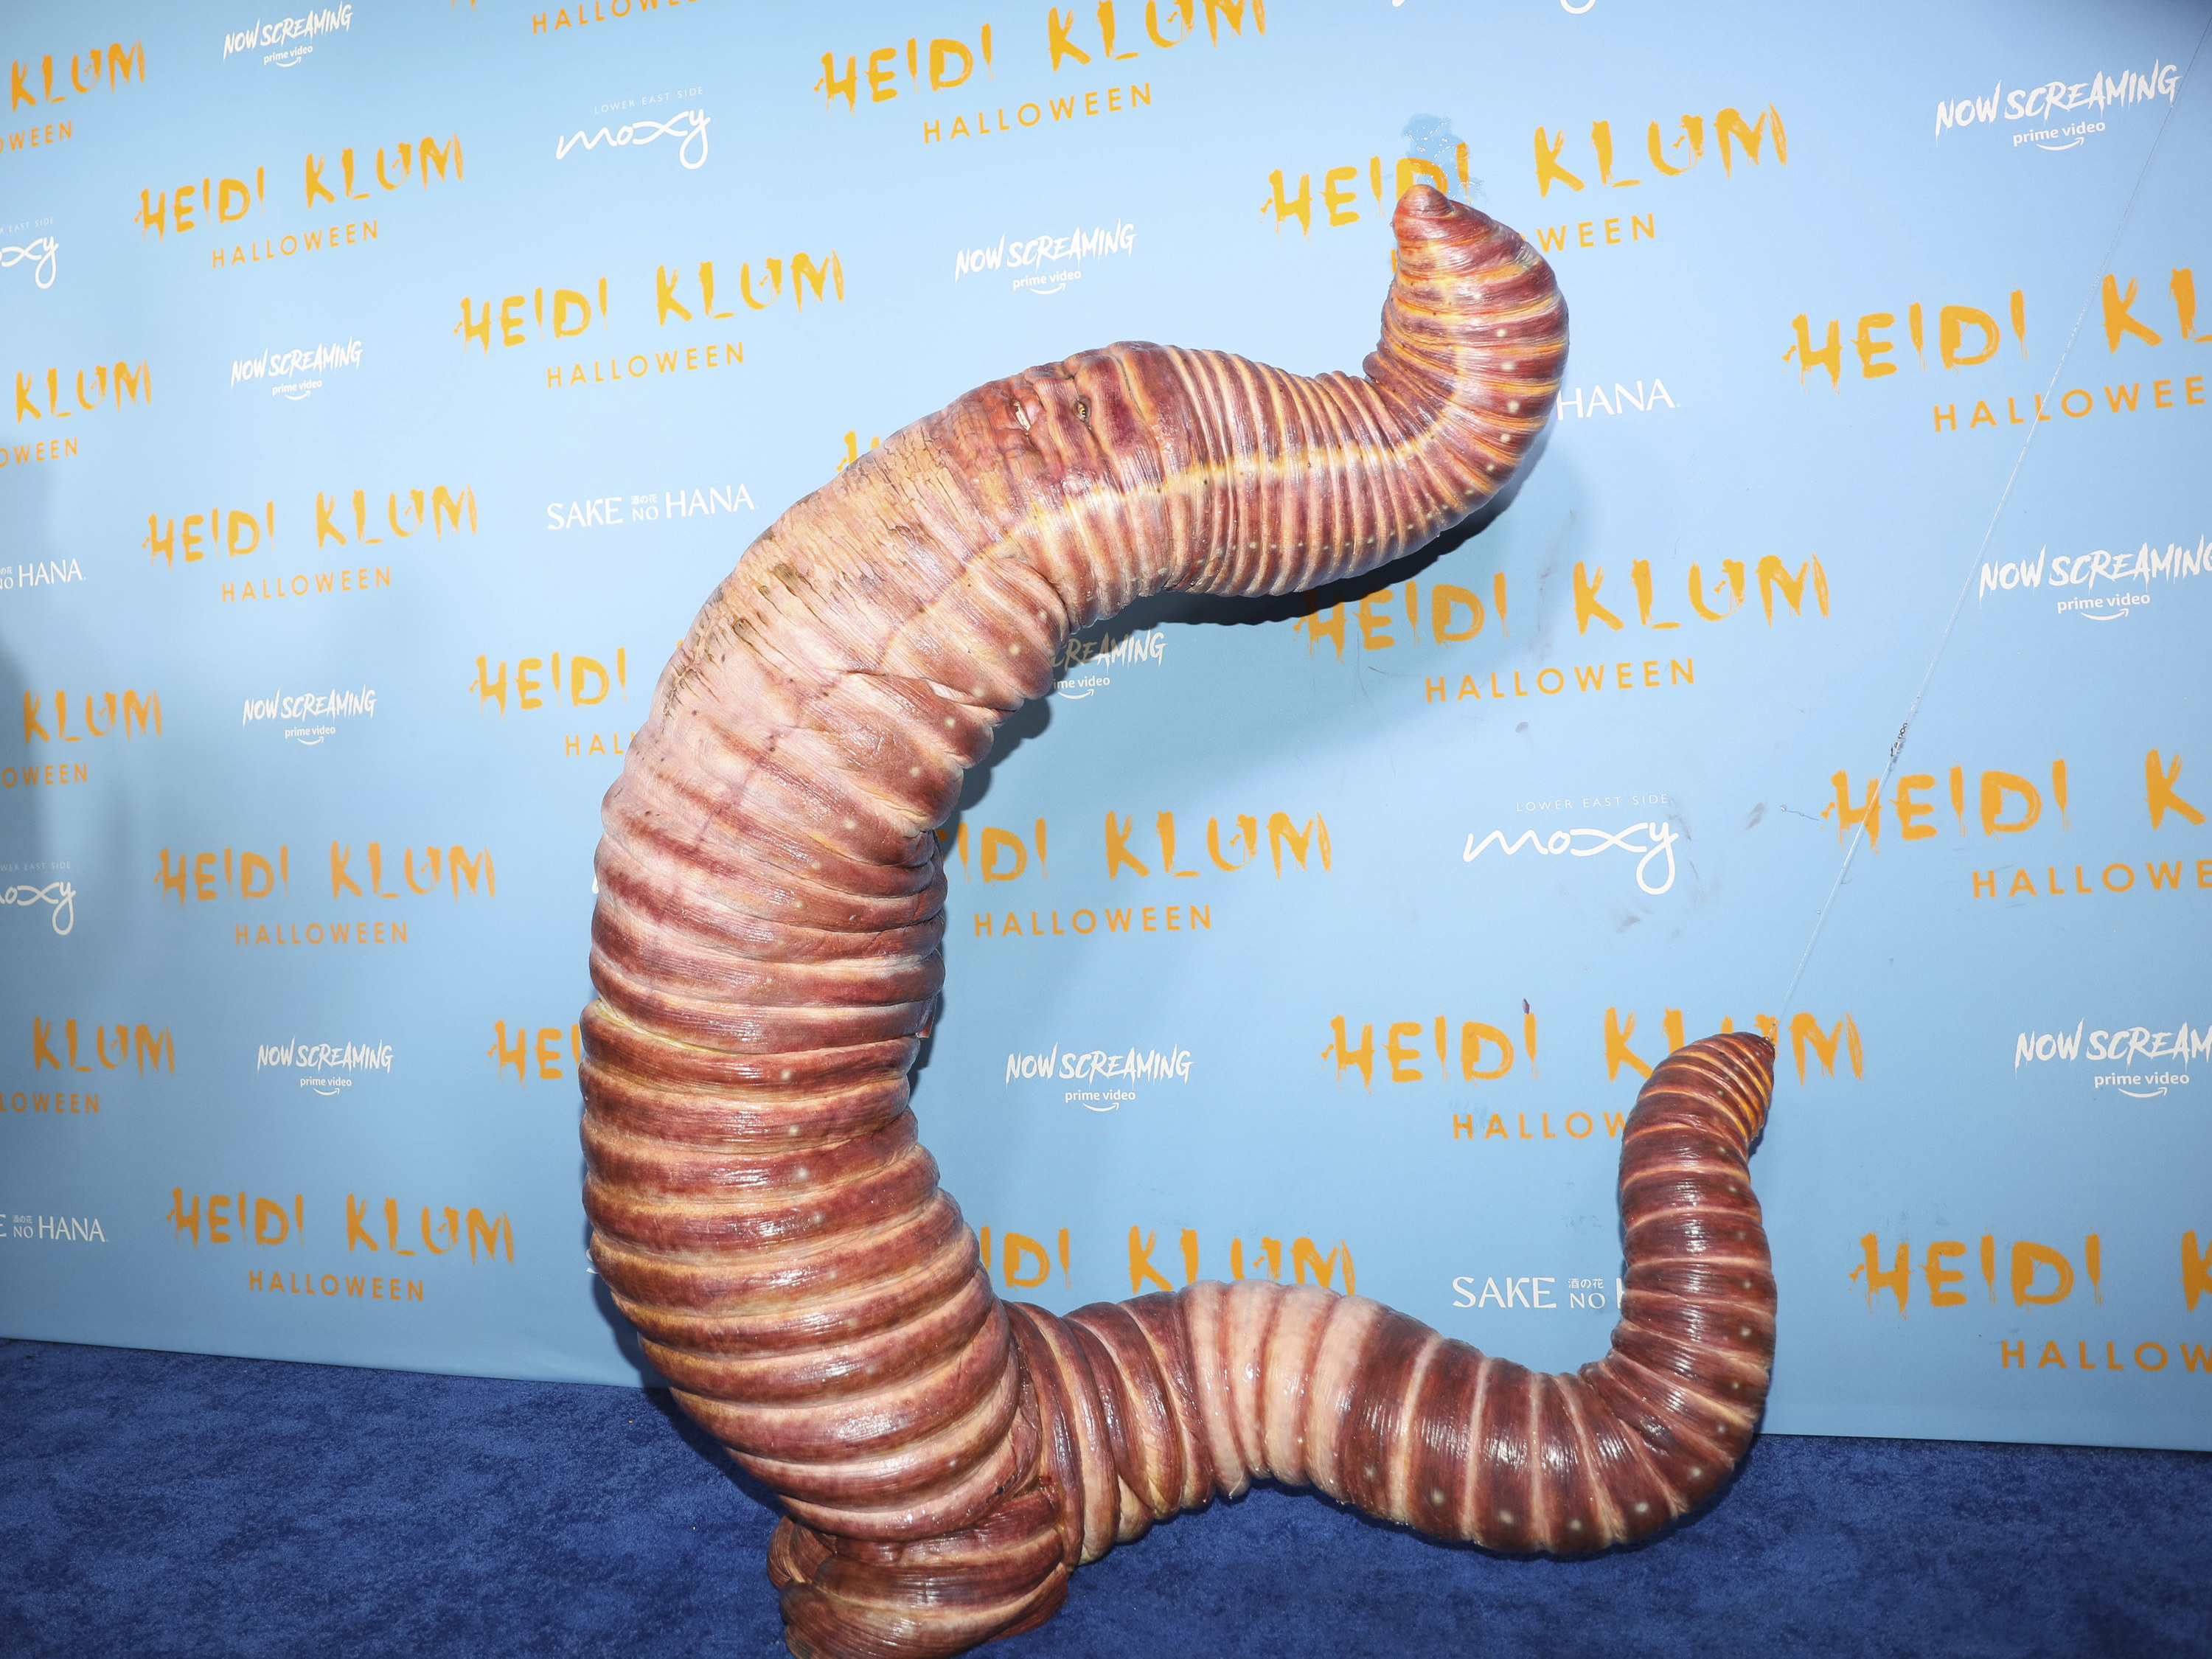 A giant worm costume stands, leaning back on a blue carpet